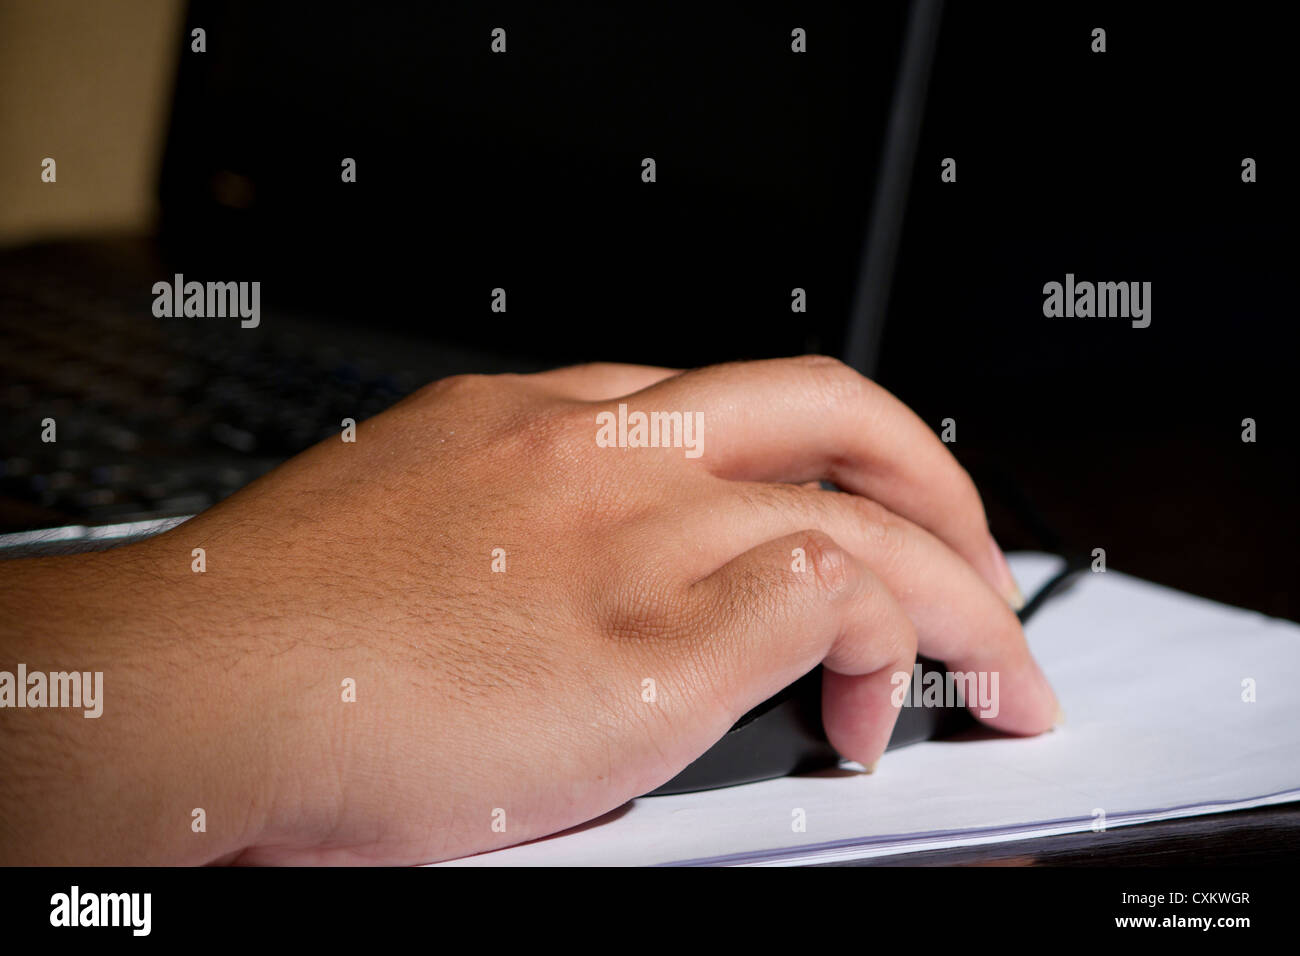 hand clicking mouse laptop lighting Stock Photo